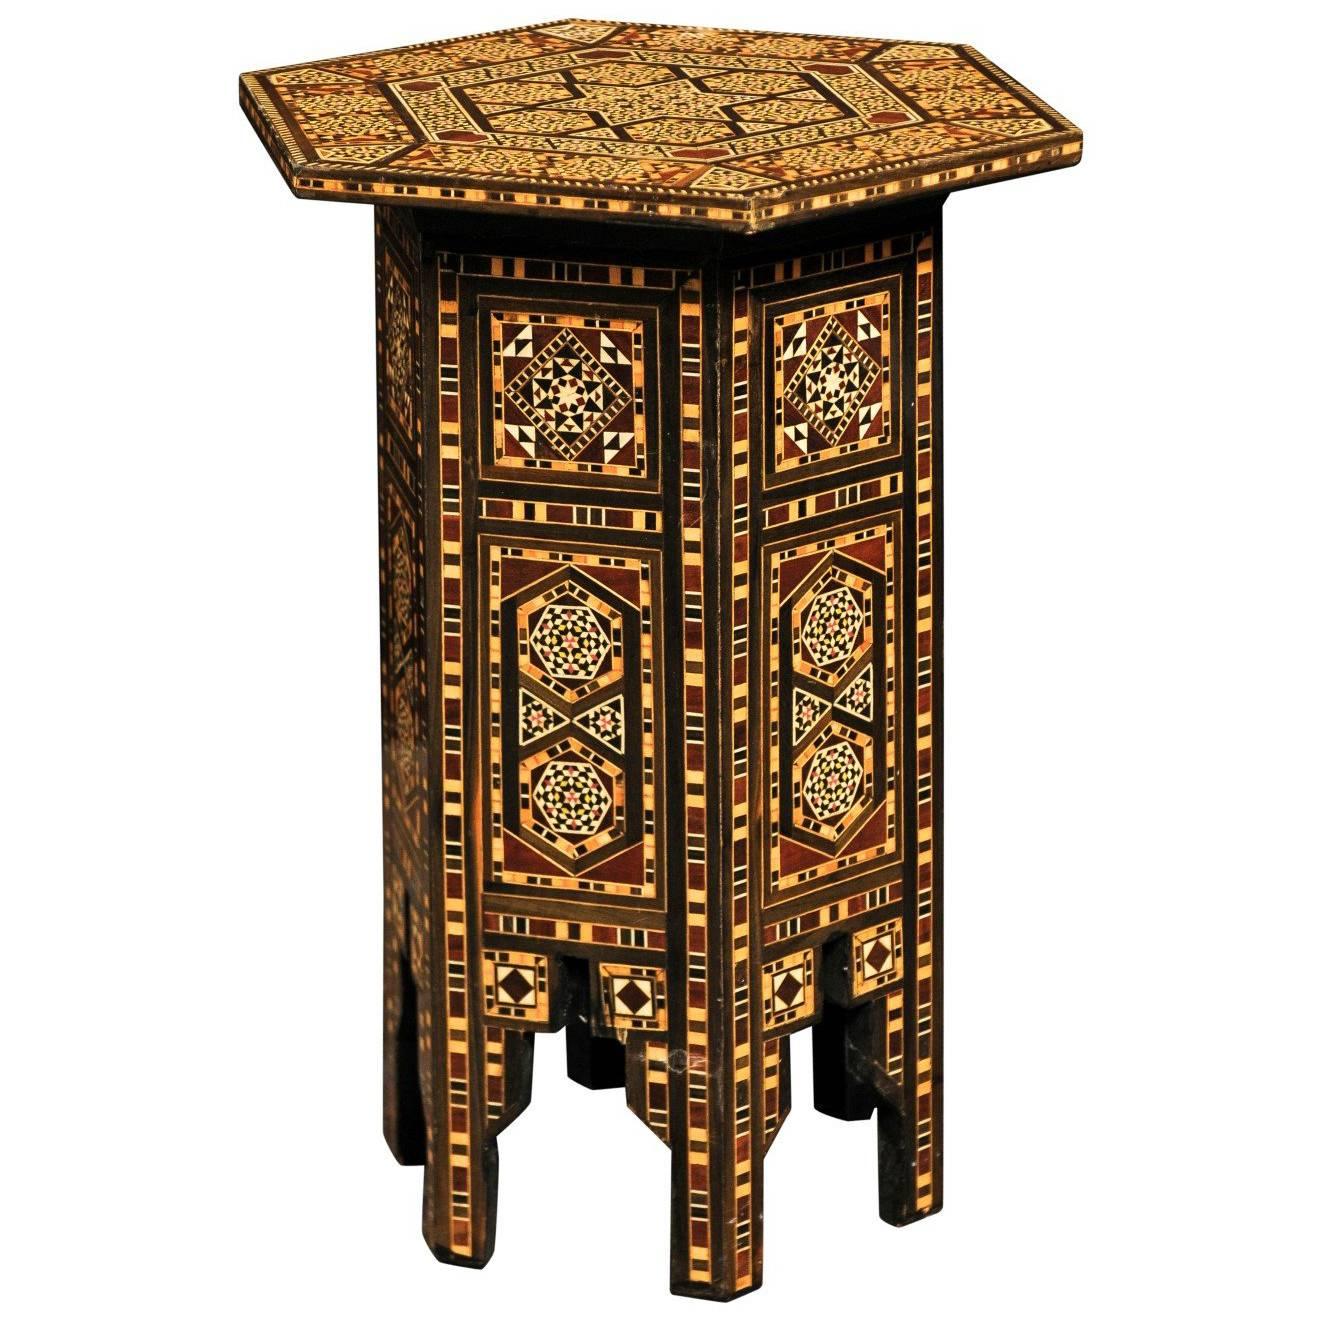 Petite Moroccan Drinks Table with Wood and Bone Inlay and Geometric Decor